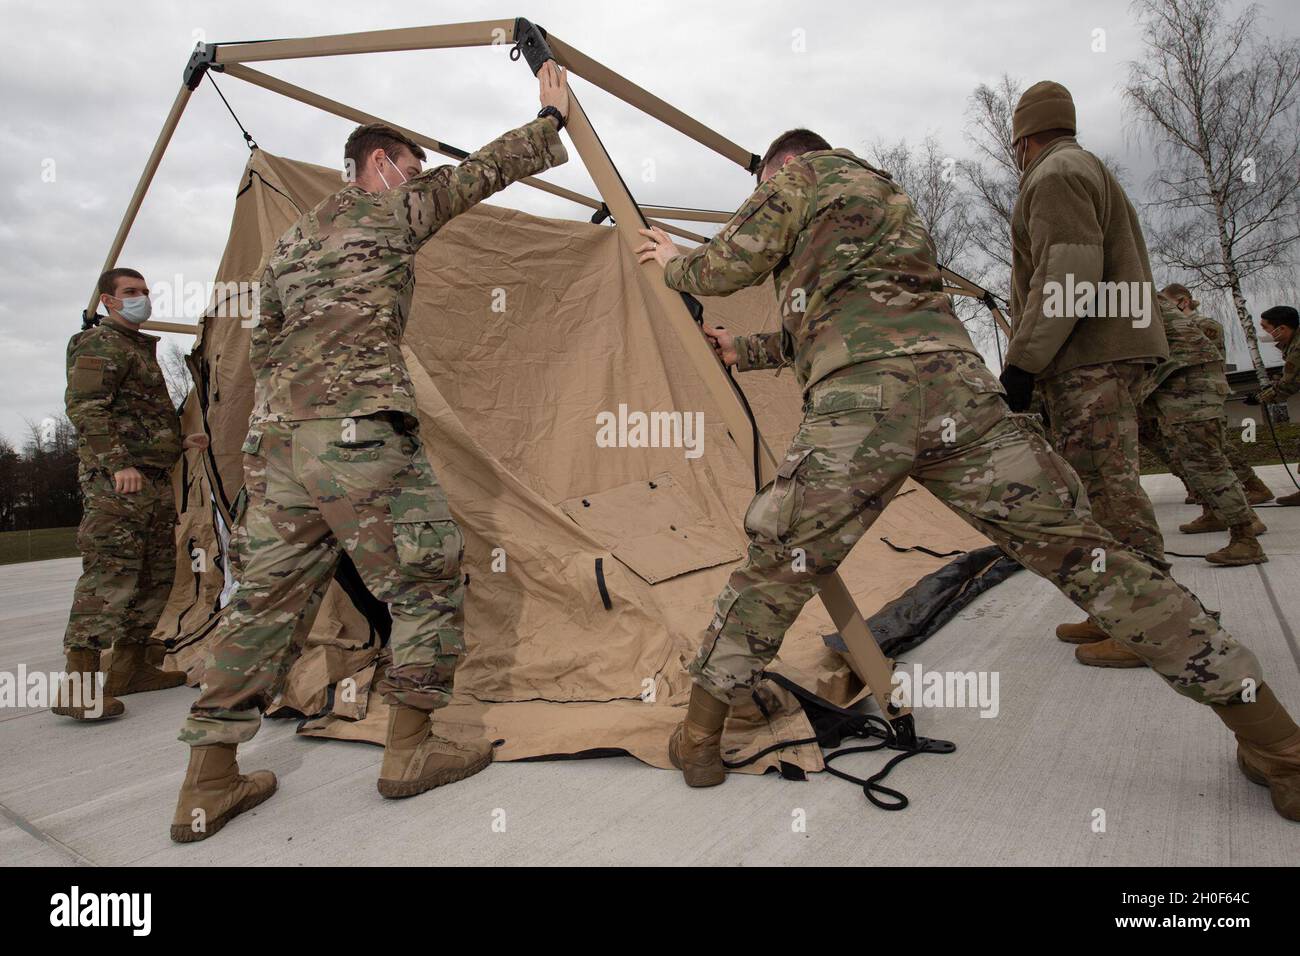 U.S. Air Force participants in the Agile Combat Employment Academy set up a tent during the training on Spangdahlem Air Base, Germany, Feb. 22, 2021. Not only did participants learn different skills during the four-day training, they also taught their own skillsets to other members to promote a highly versatile deployment force. Stock Photo